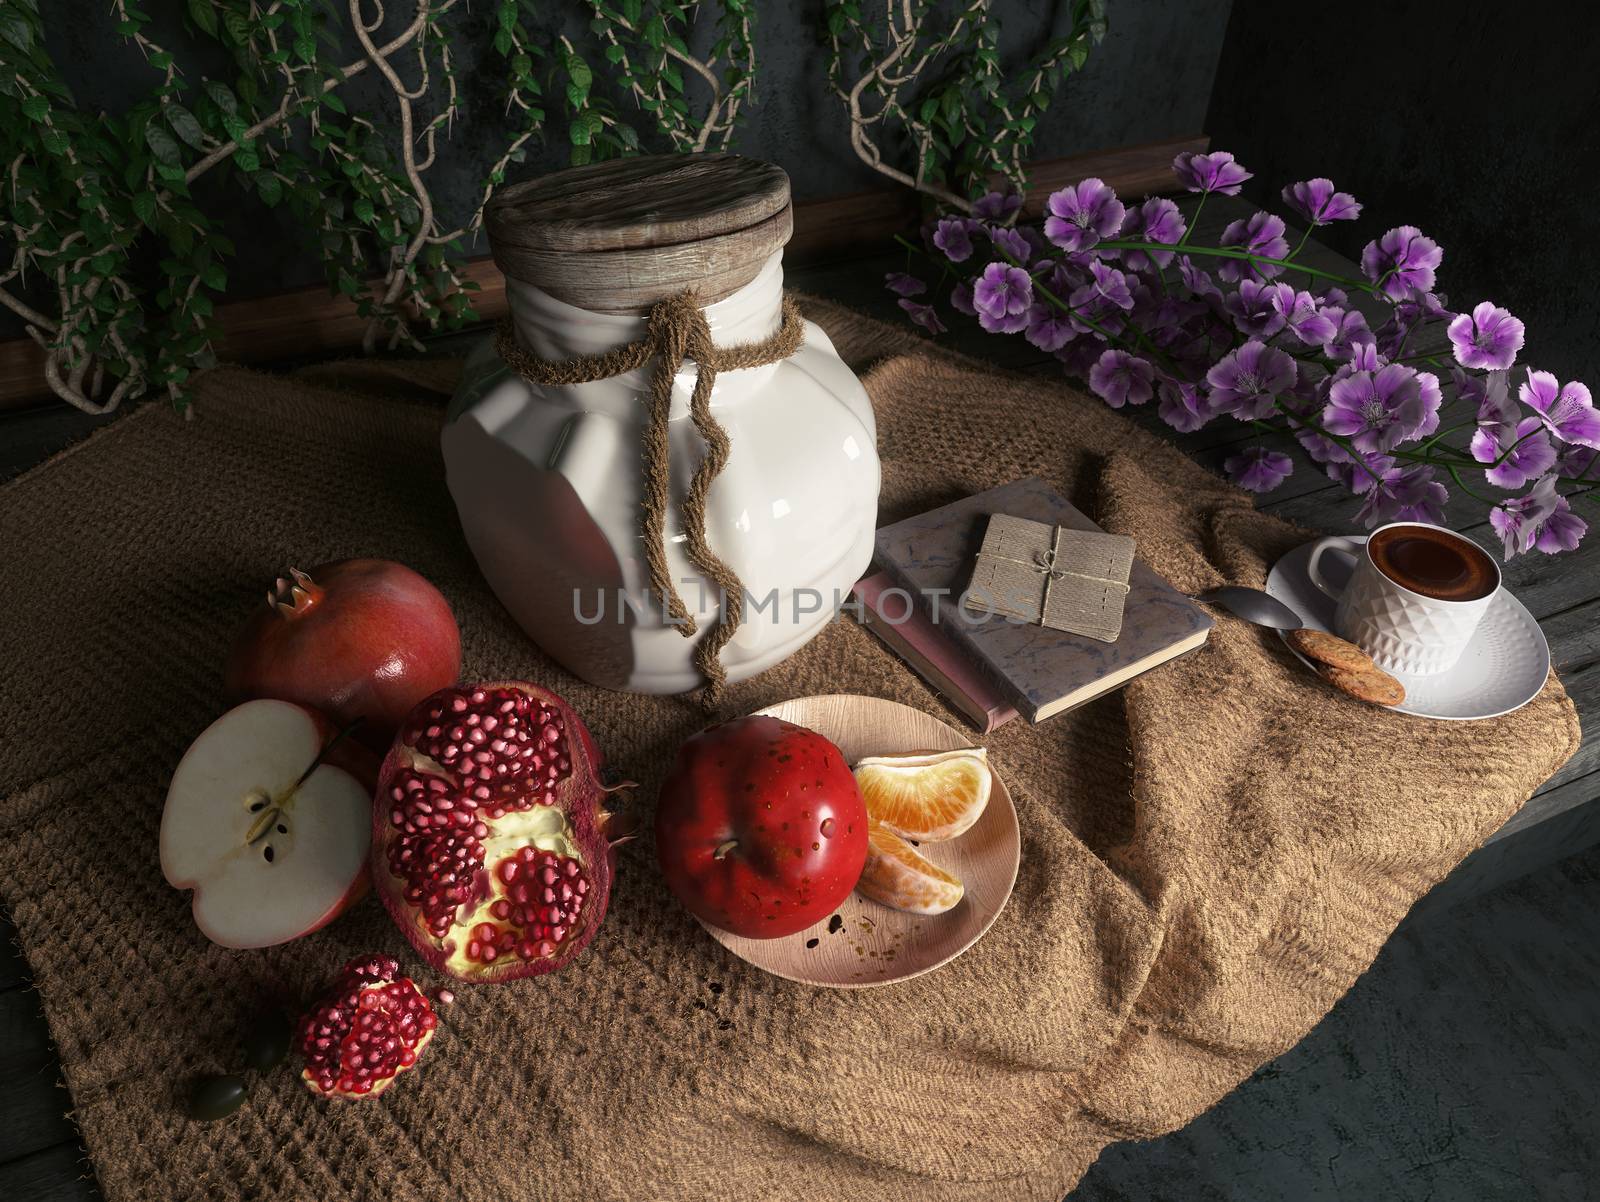 jar,apples,pomegranate,coffe cup with books and orange on canvas drapery conceptual still-life by denisgo